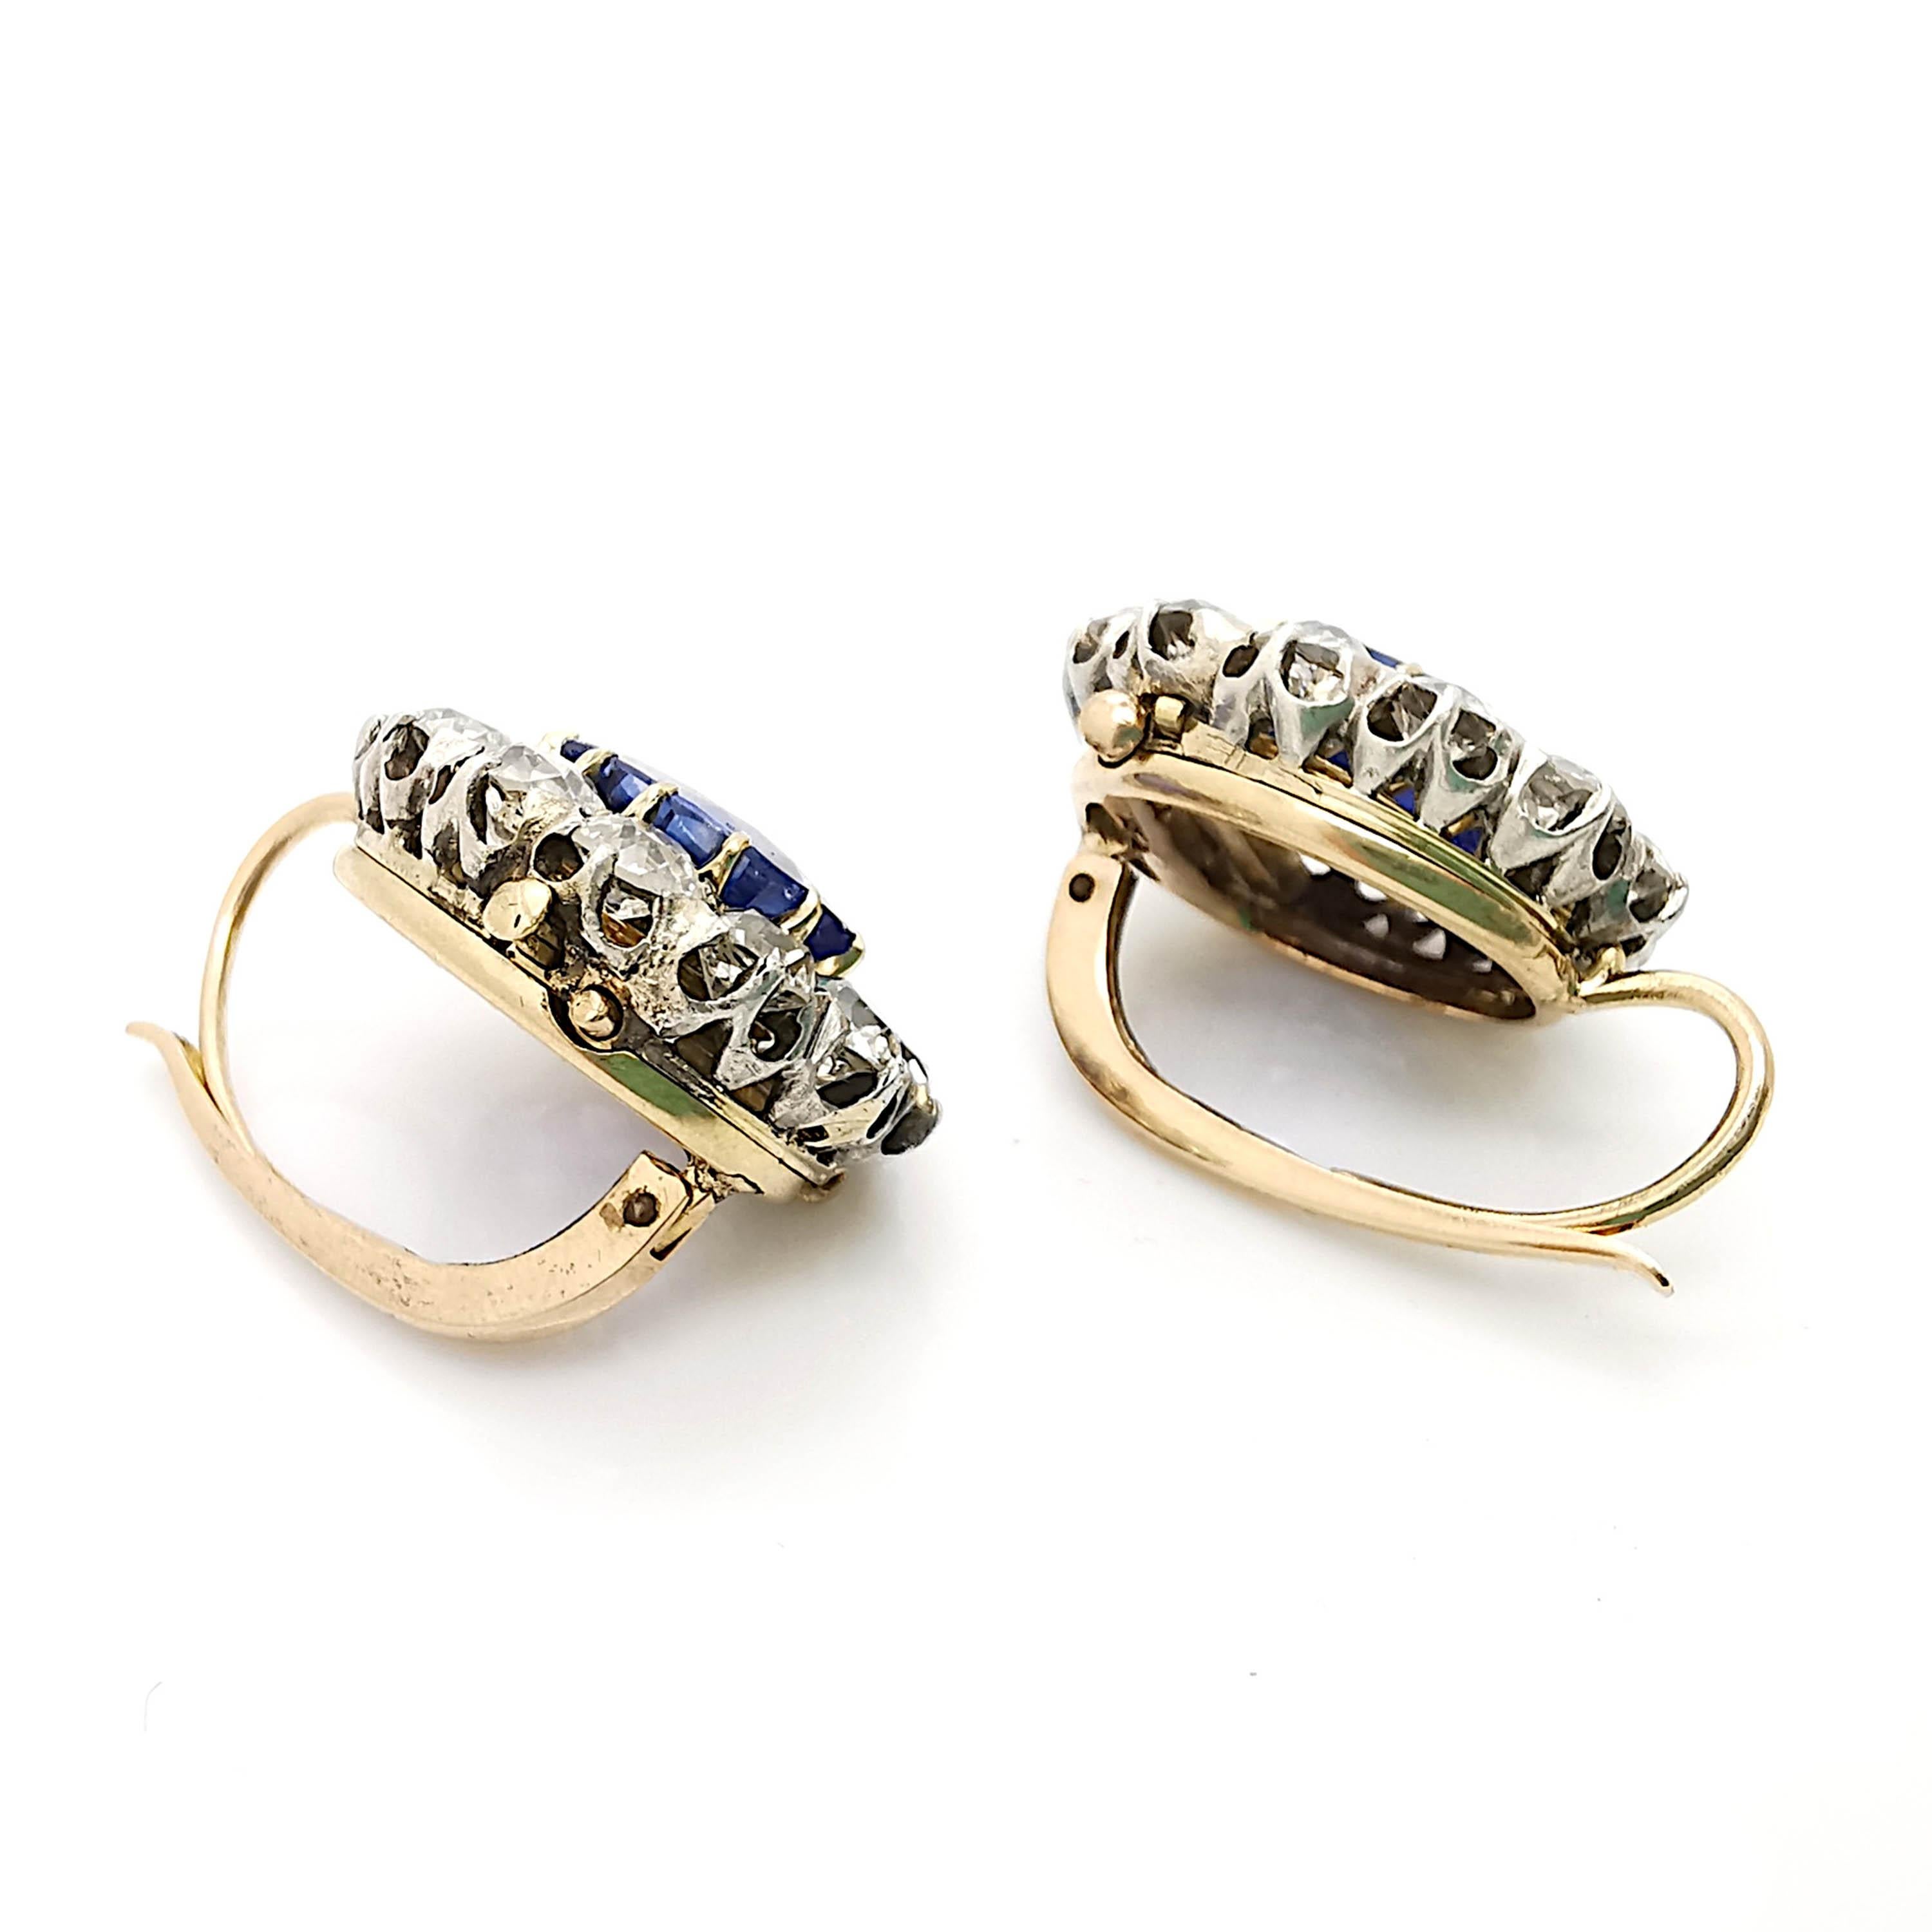 Oval Cut Sapphire And Diamond Cluster Earrings, Platinum And Gold, Circa 1890 For Sale